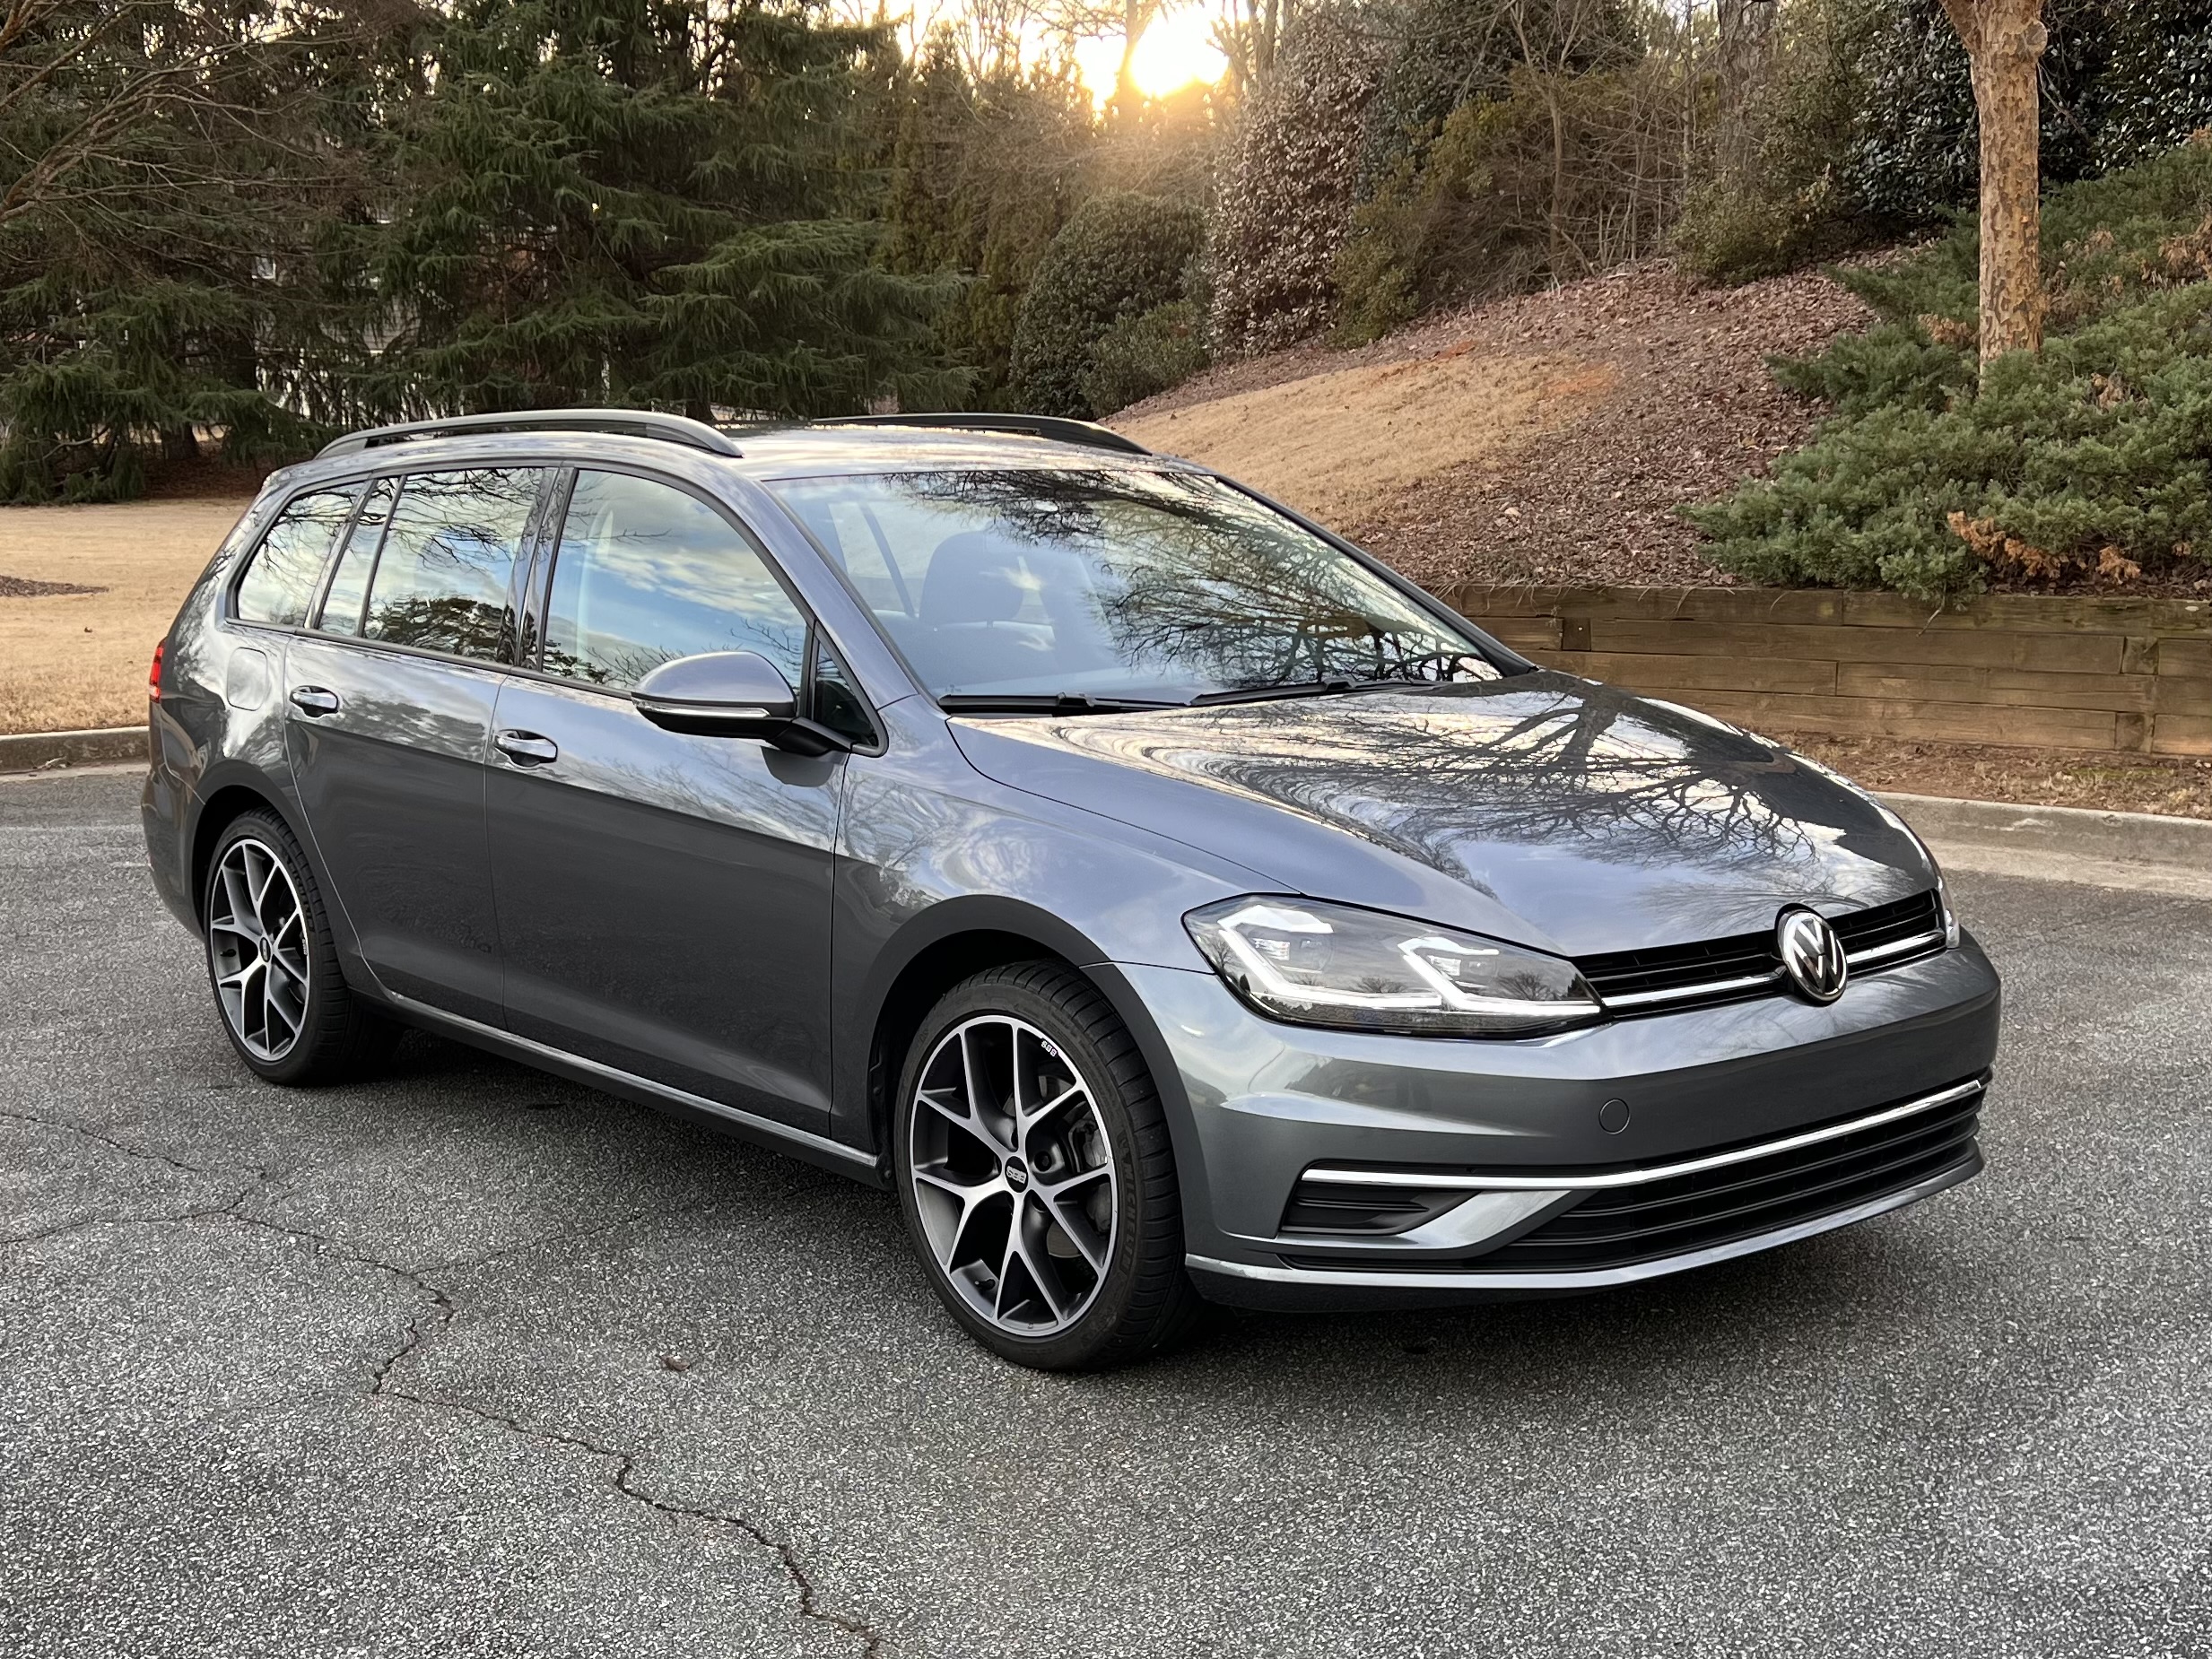 46 Used Volkswagen Golf Plus Cars for sale at MOTORS